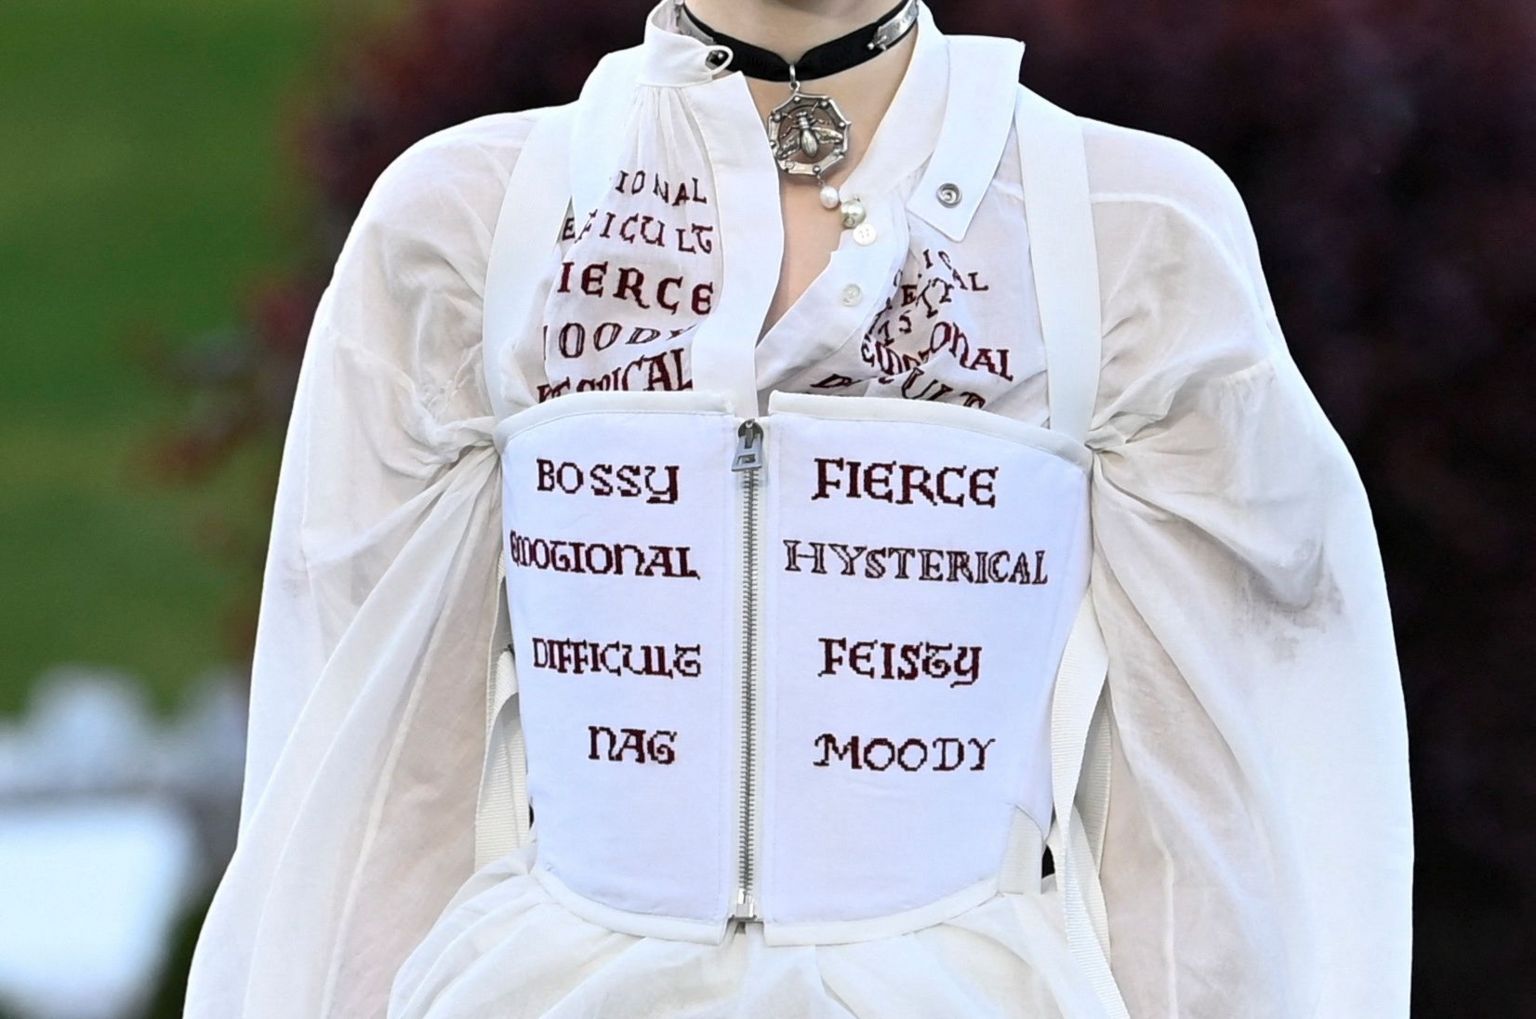 A model presents an outfit featuring embroidered insults used for woman